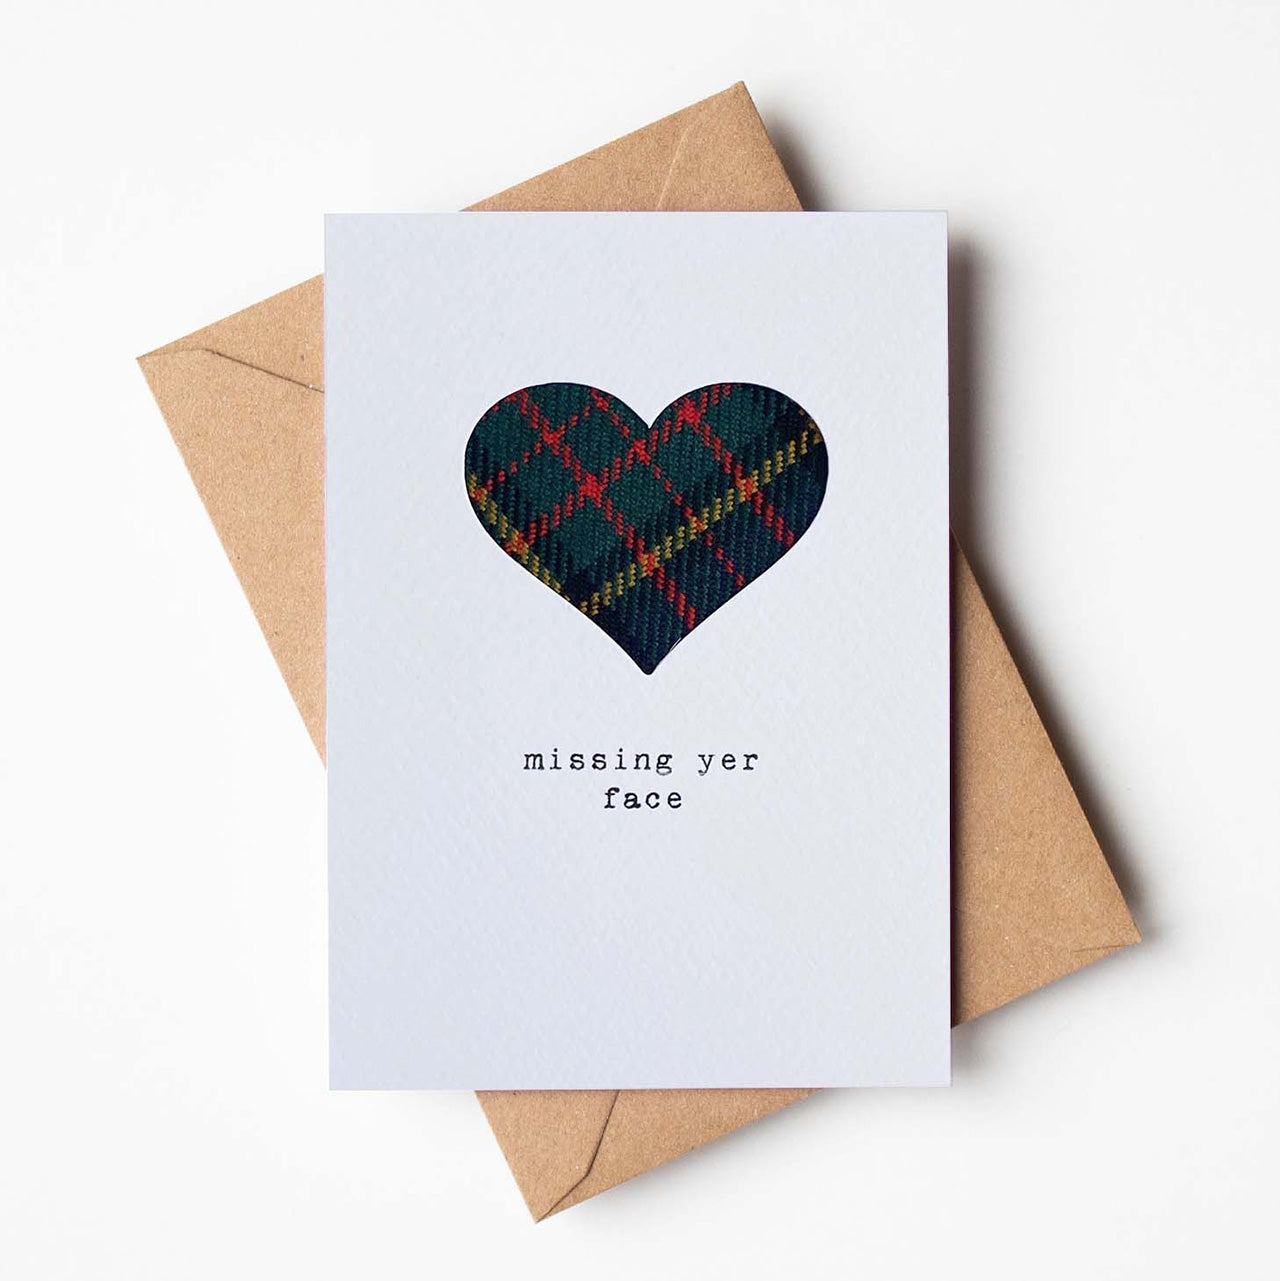 'Missing yer face' Scottish Card with Tartan